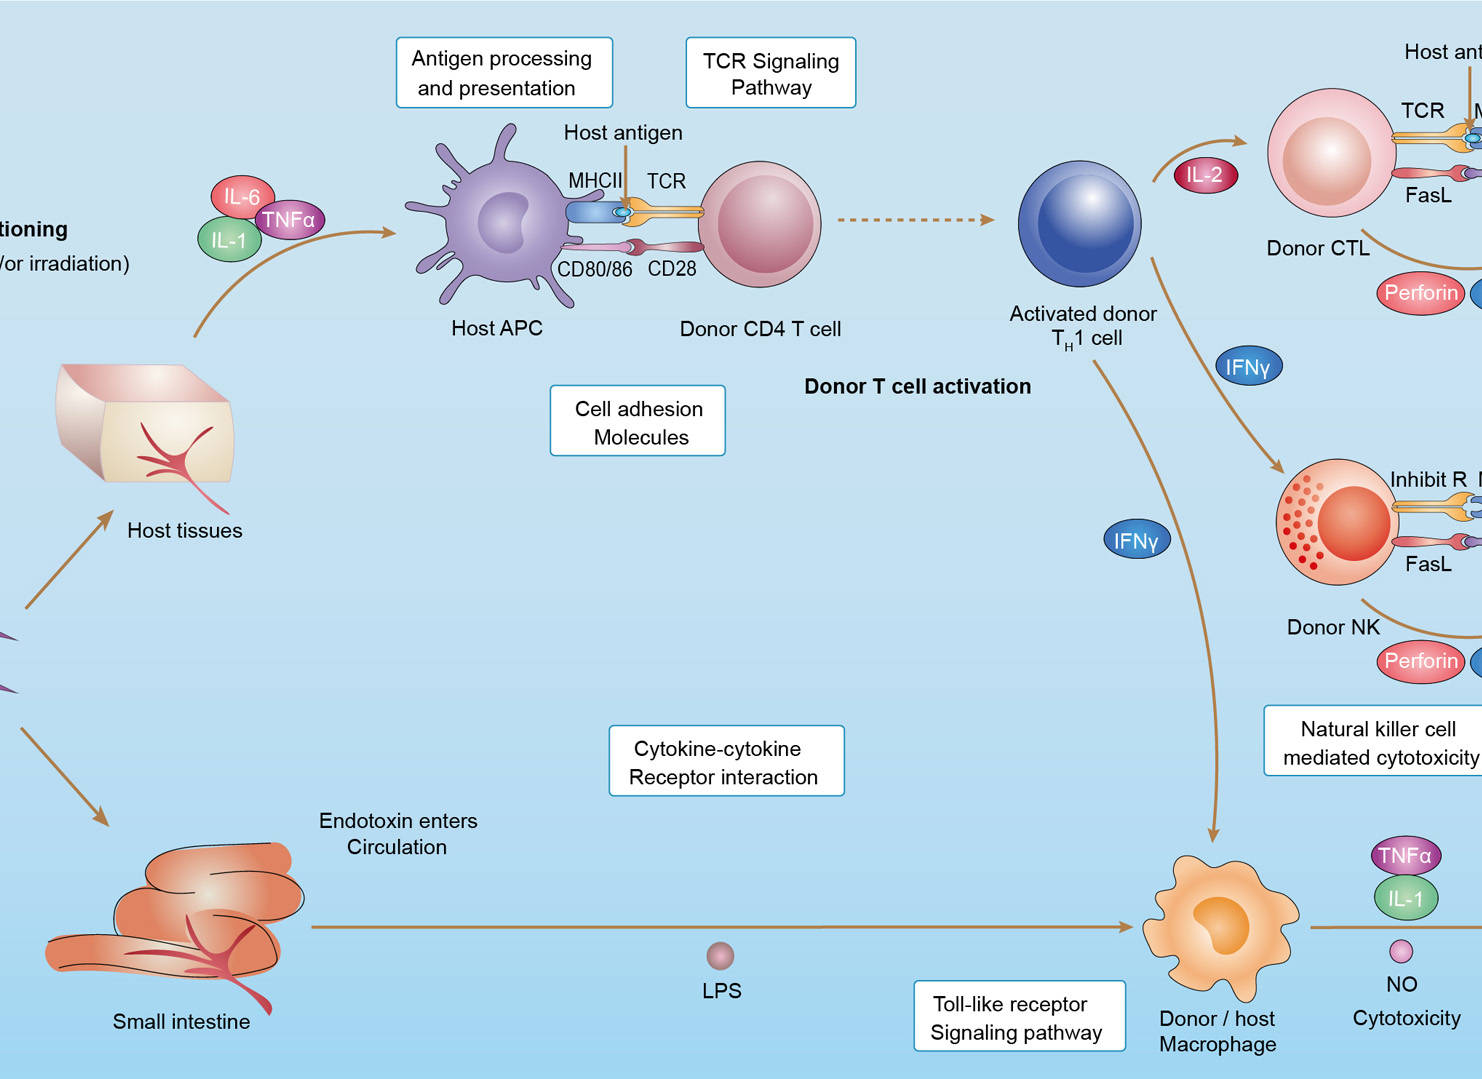 Graft versus host Disease Overview - Pathways, Diagnosis, Targeted Therapies